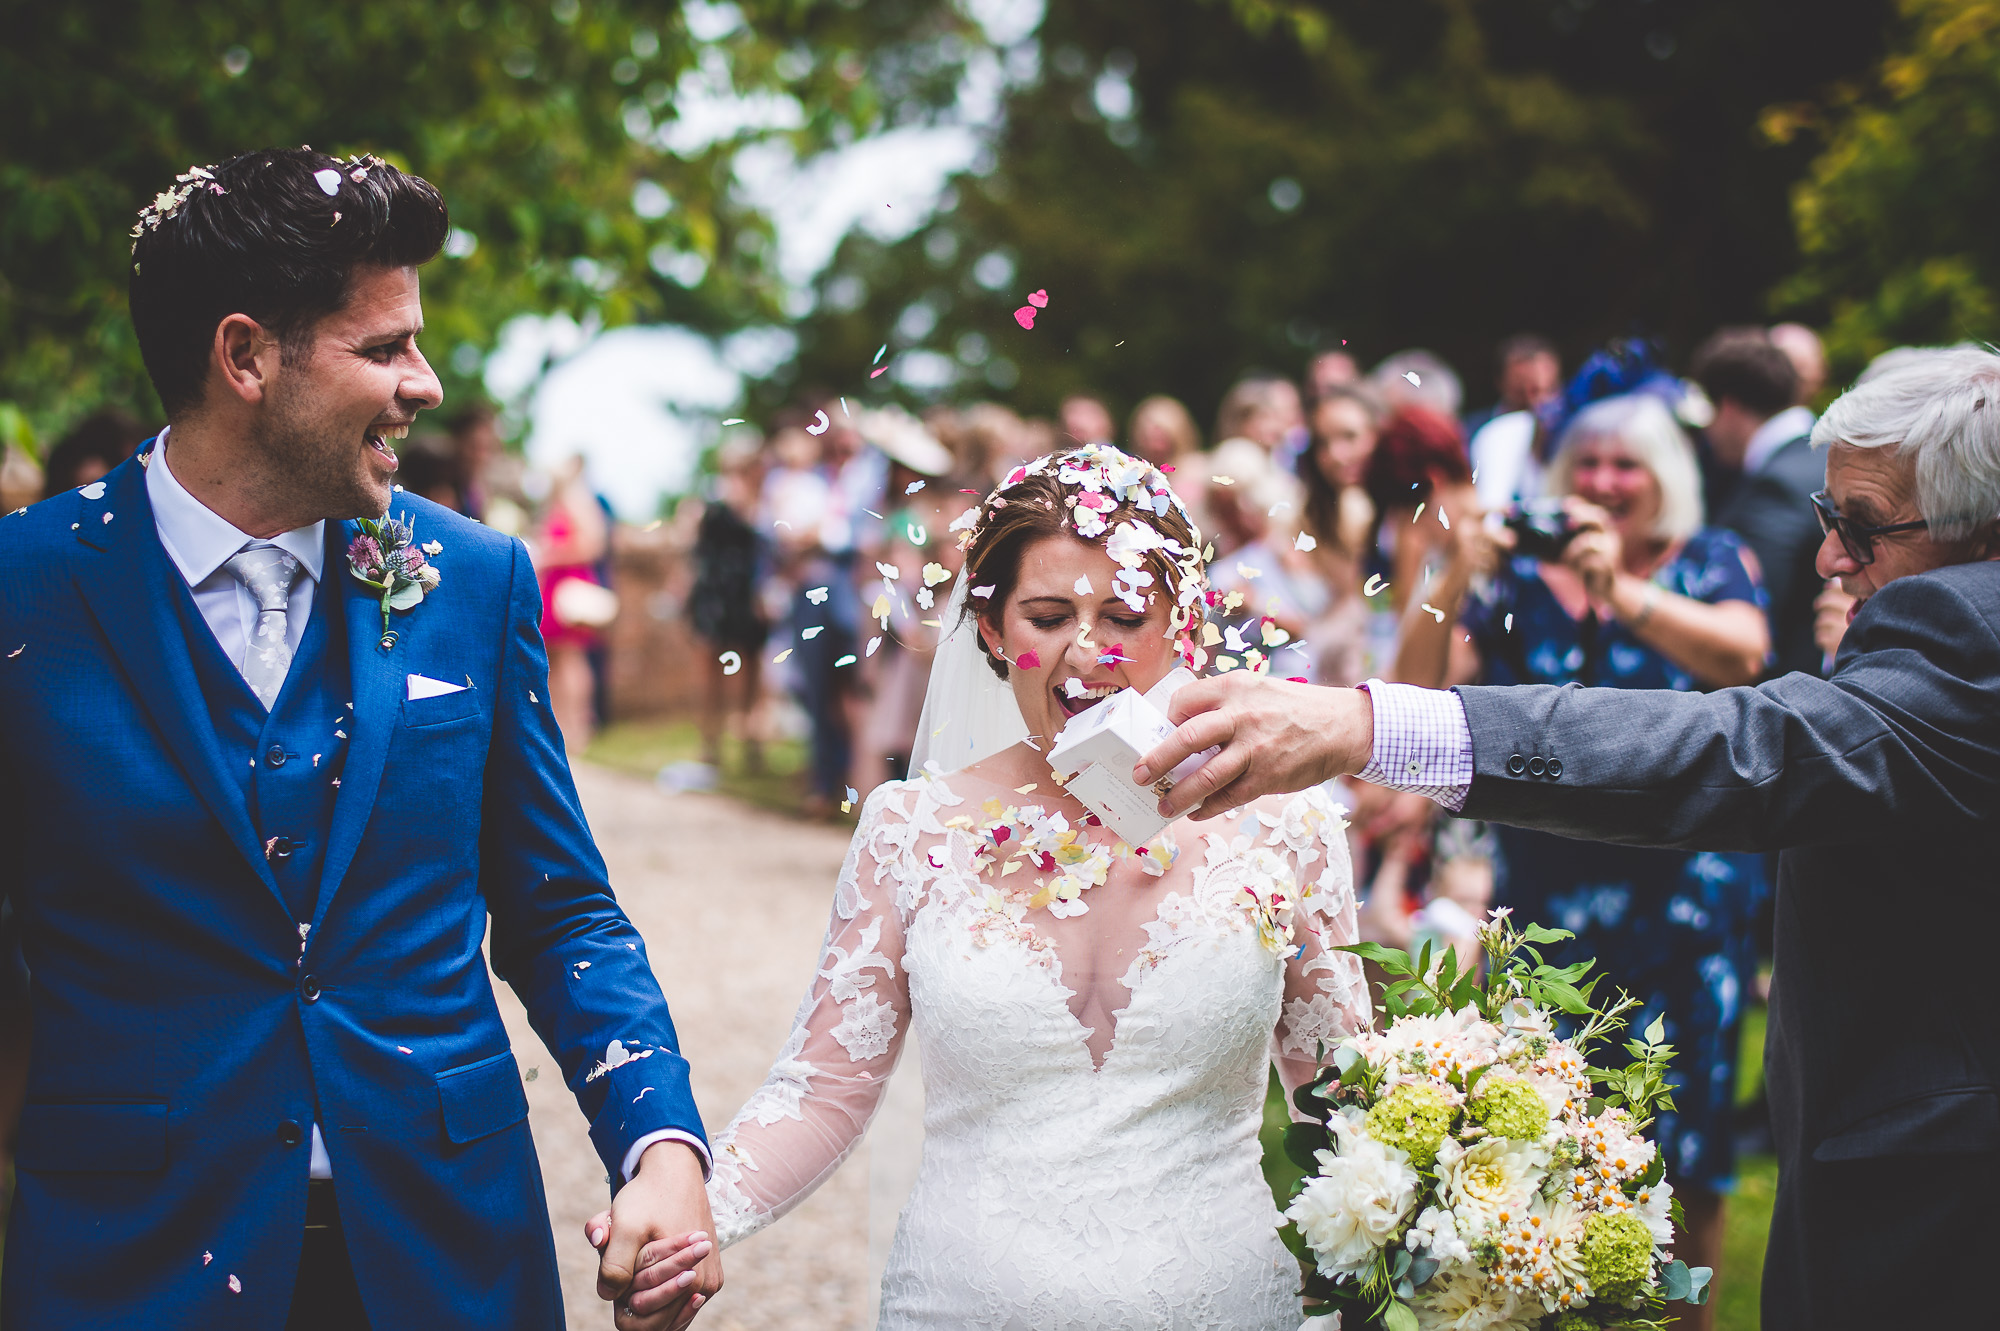 A wedding photo captures the joyous moment of a bride and groom being confettied.